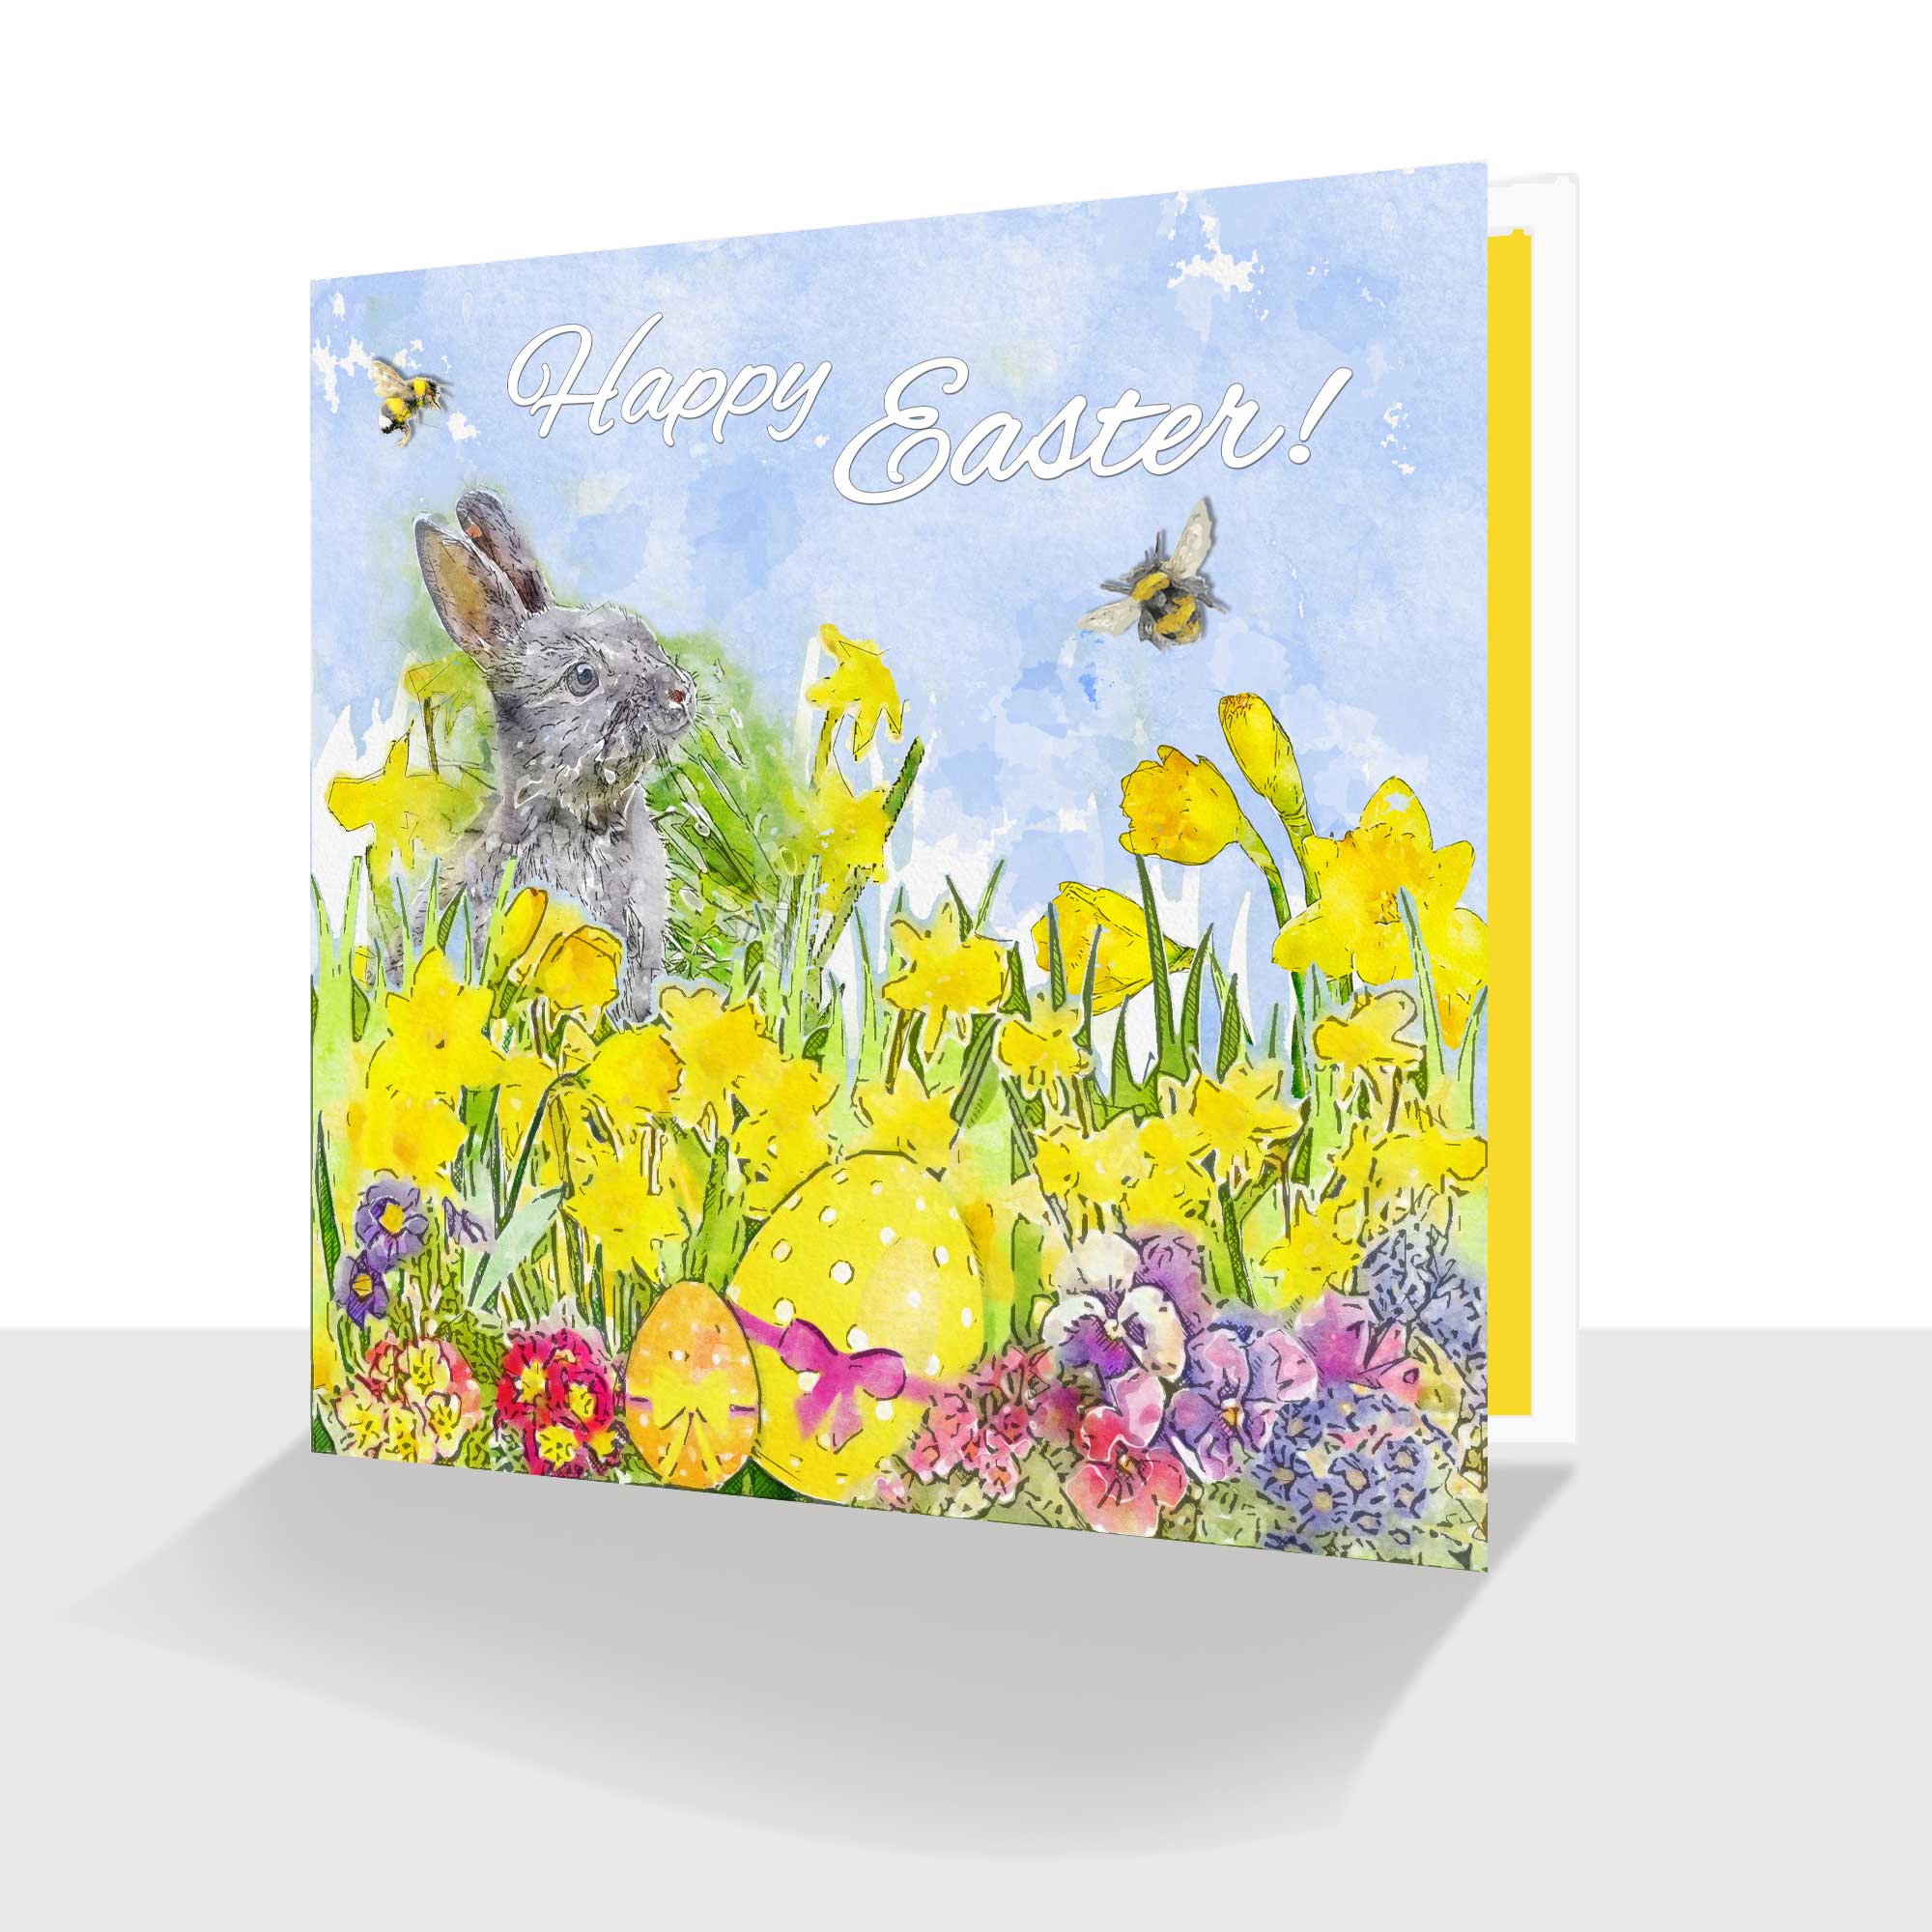 Cute Happy Easter Card - Easter Bunny, Spring Flowers, Easter Eggs and Bees